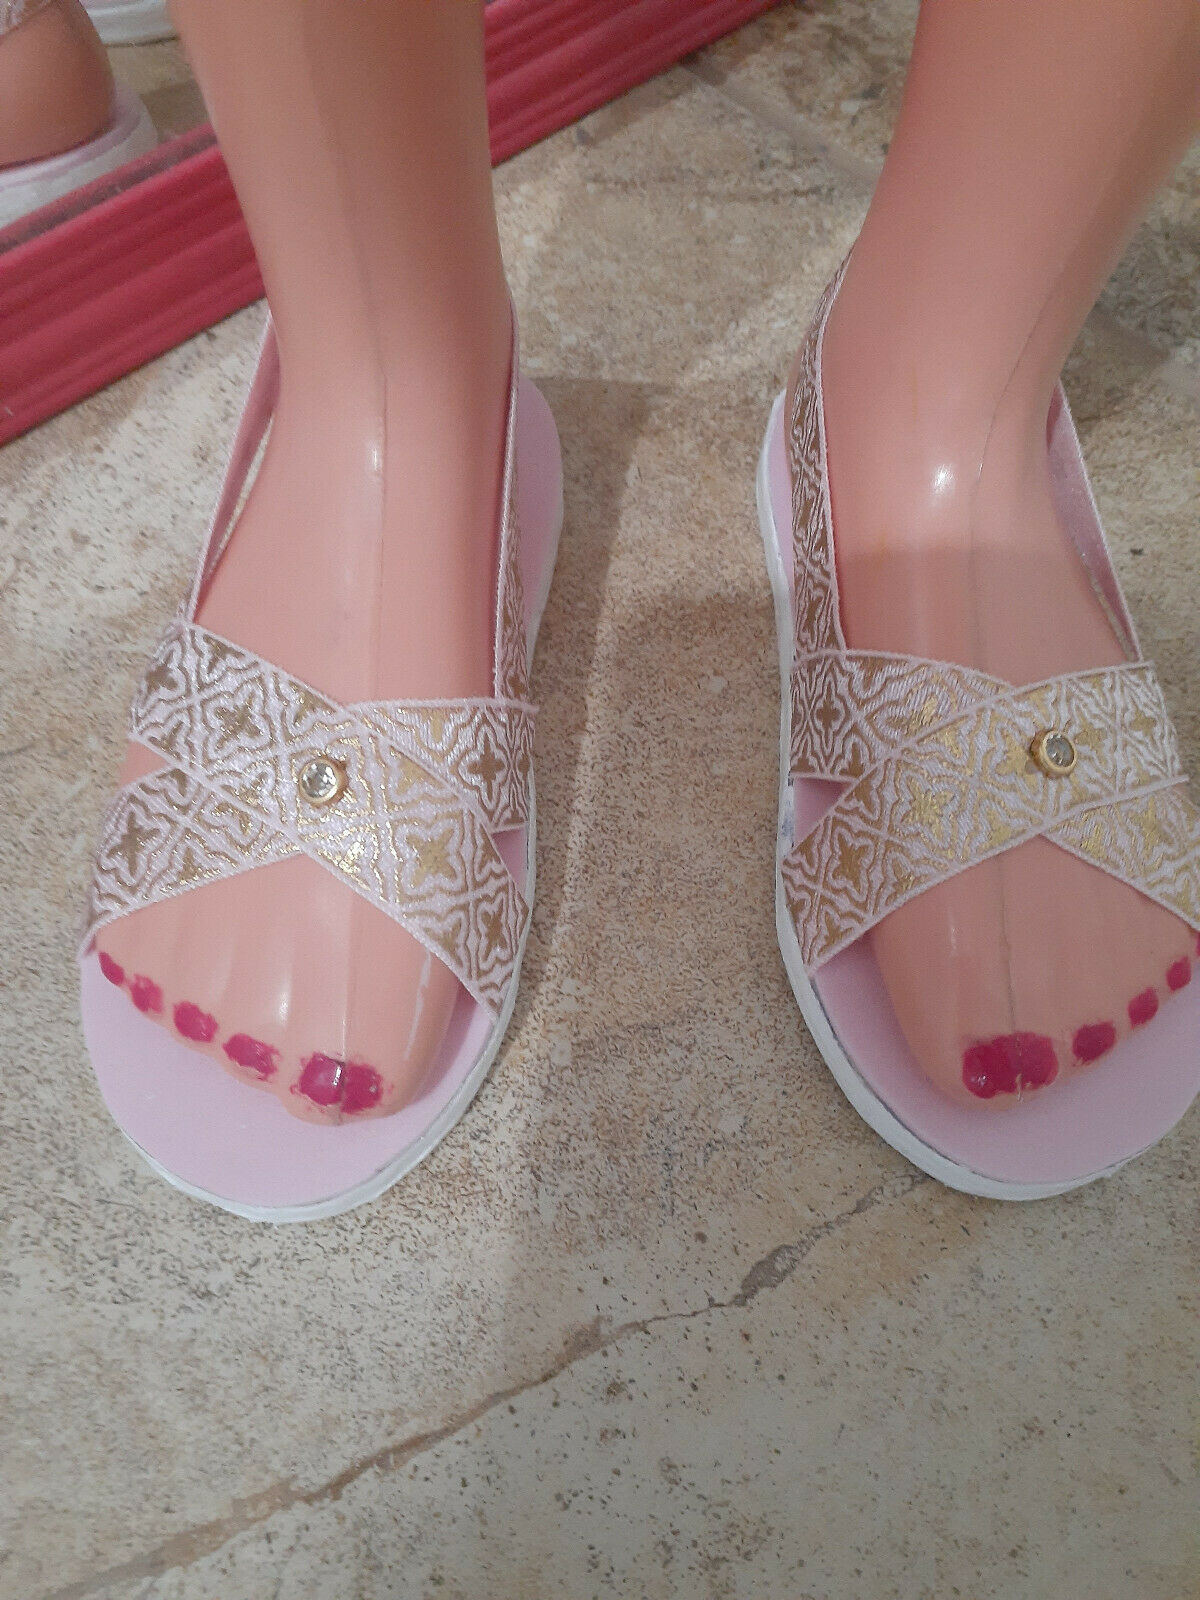 36" My Size Barbie Pink Sandals Shoes